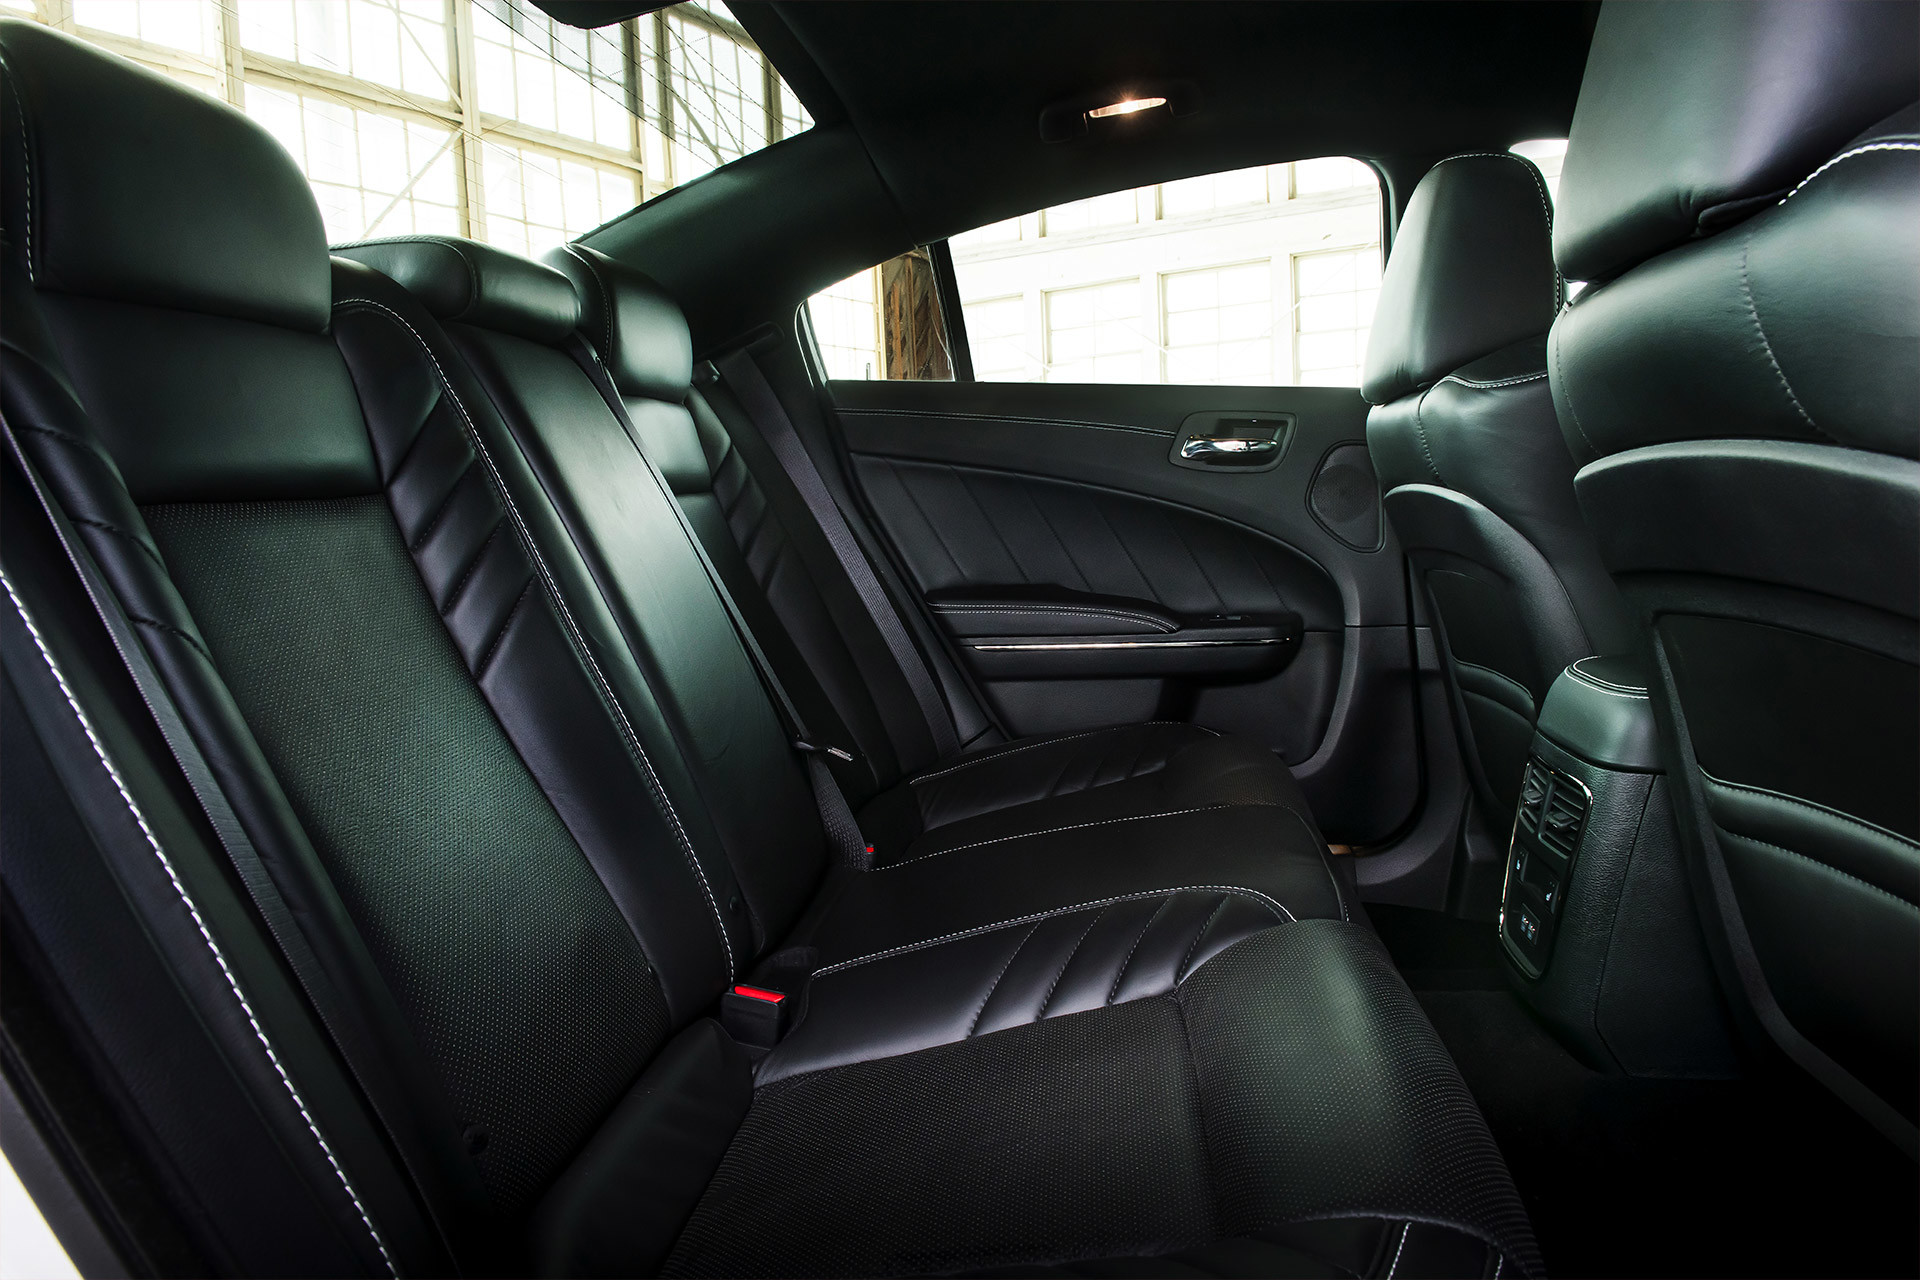 The back seats of a Dodge Charger in black leather